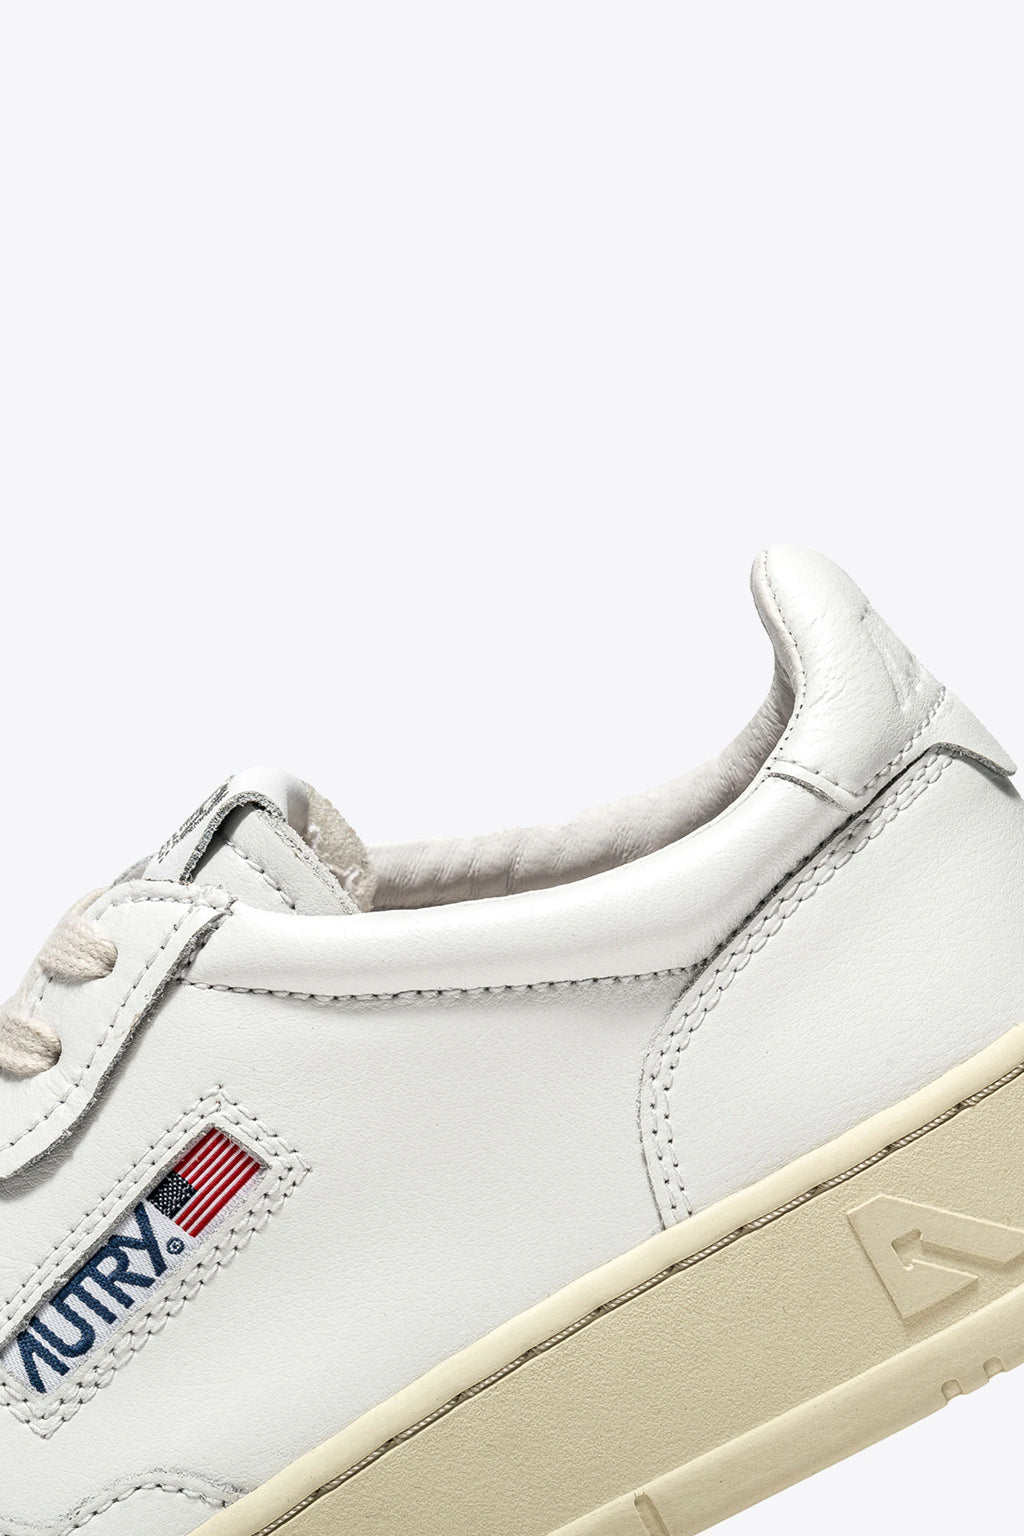 alt-image__White-leather-low-sneakers---Medalist-low